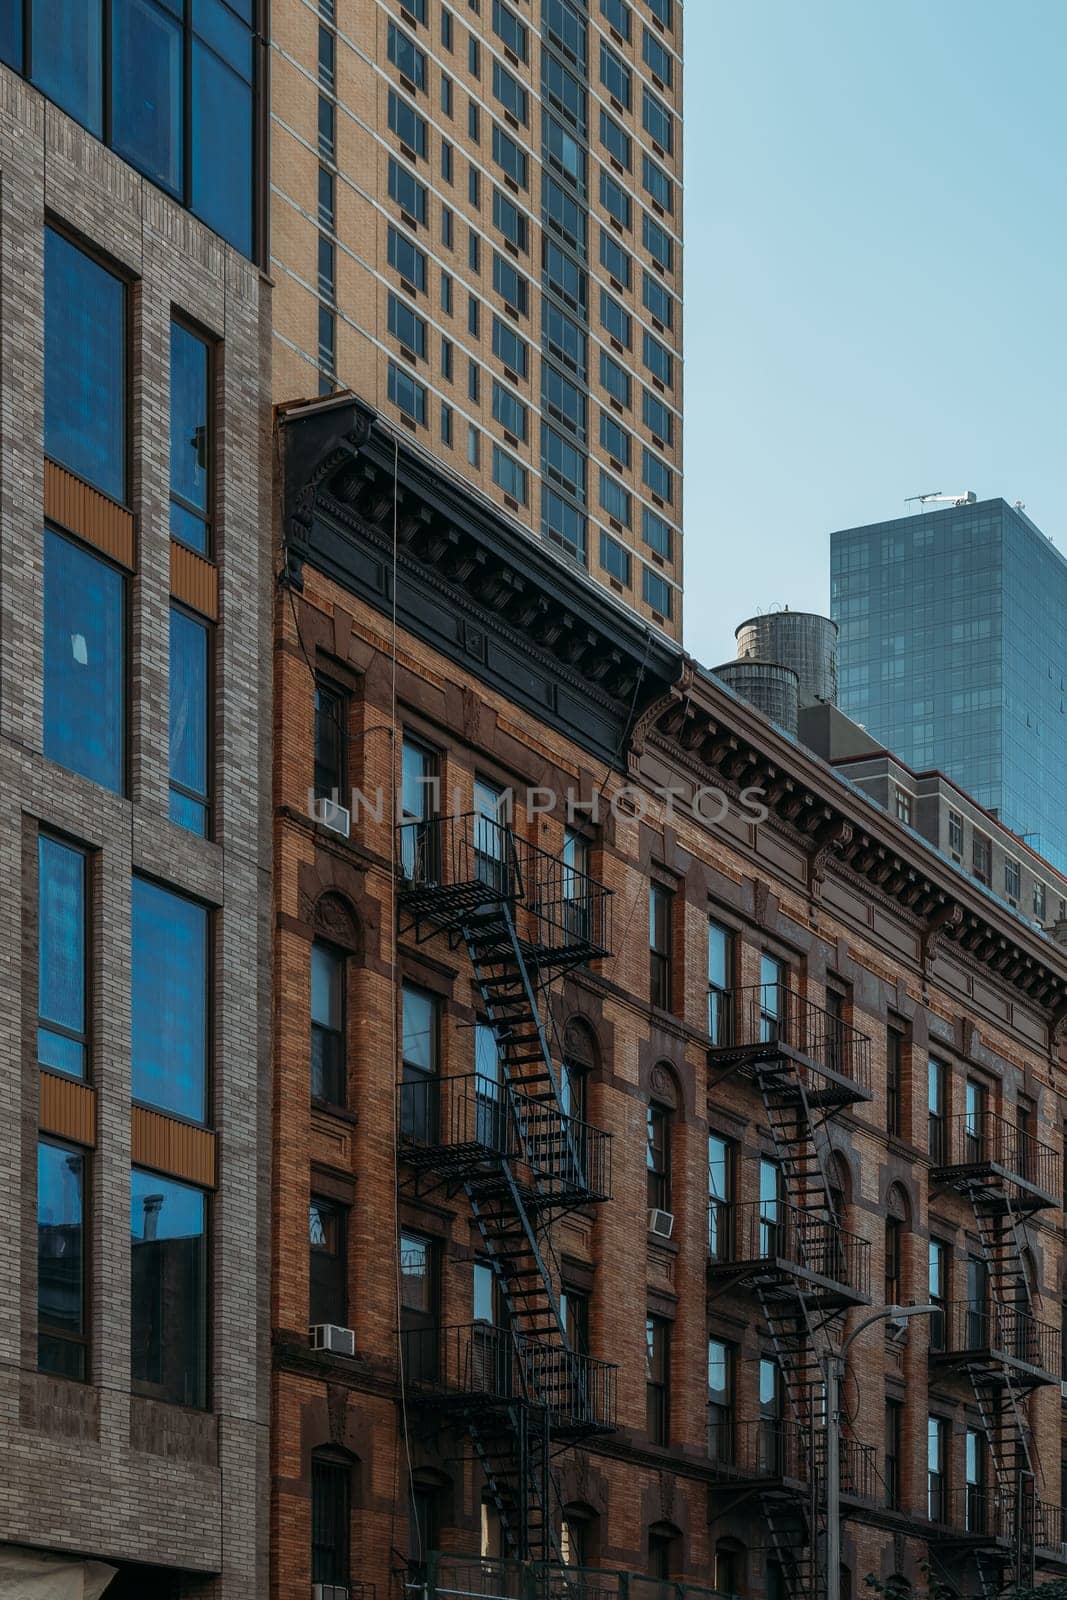 A blend of historic New York City buildings featuring classic fire escapes contrasting with a modern high-rise in the background.